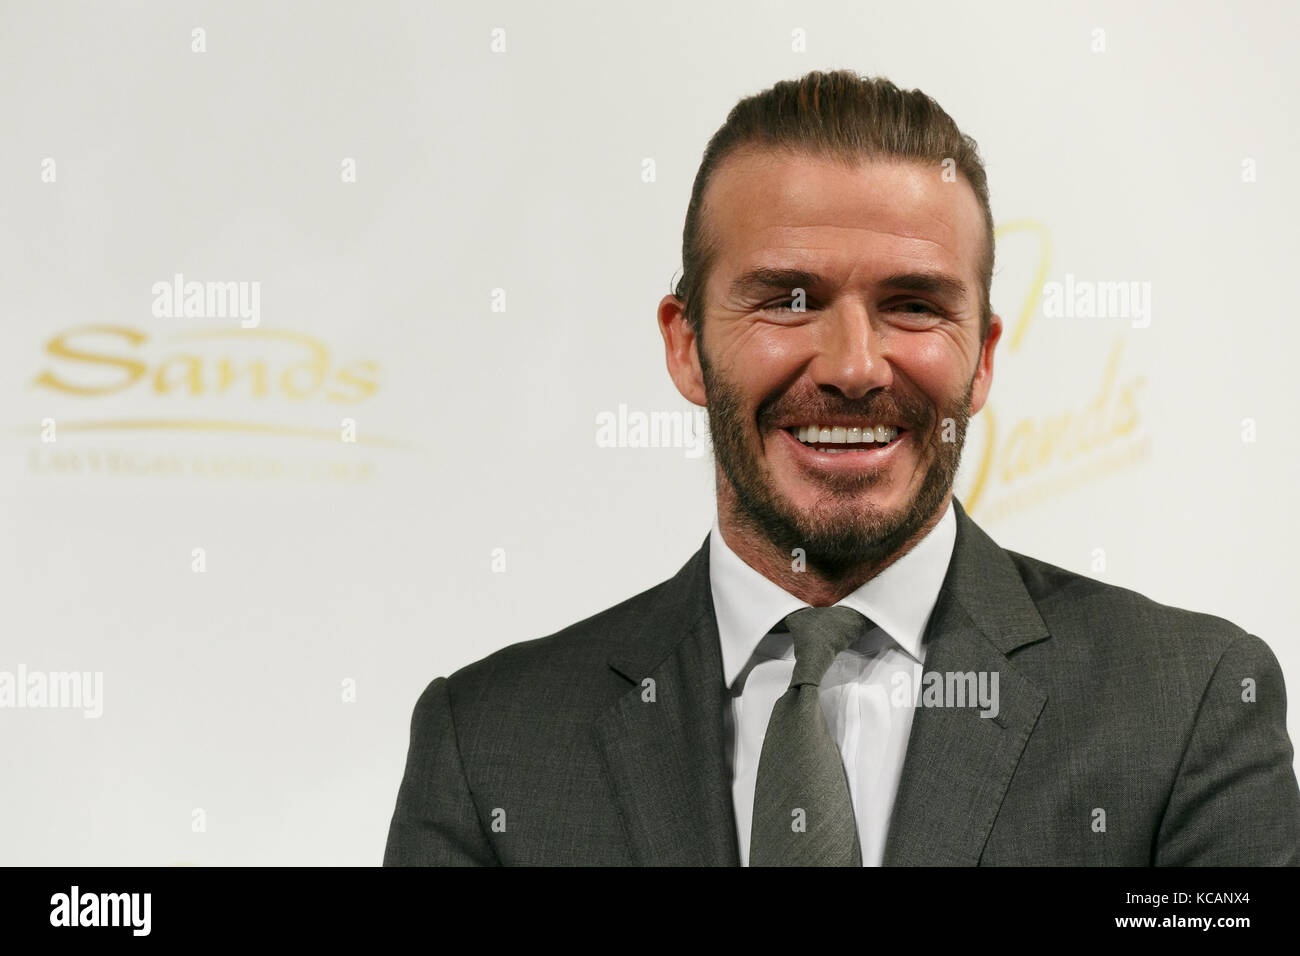 Palace Hotel, Tokyo, Japan. 4th Oct 2017. English former professional soccer star David Beckham attends a news conference for Las Vegas Sands Corp. on 4 October 2017, Tokyo, Japan., Japan. Beckham, who acts as Sands' global ambassador, attended a panel session to discuss the potential for integrated resorts in Japan. Credit: Aflo Co. Ltd./Alamy Live News Stock Photo